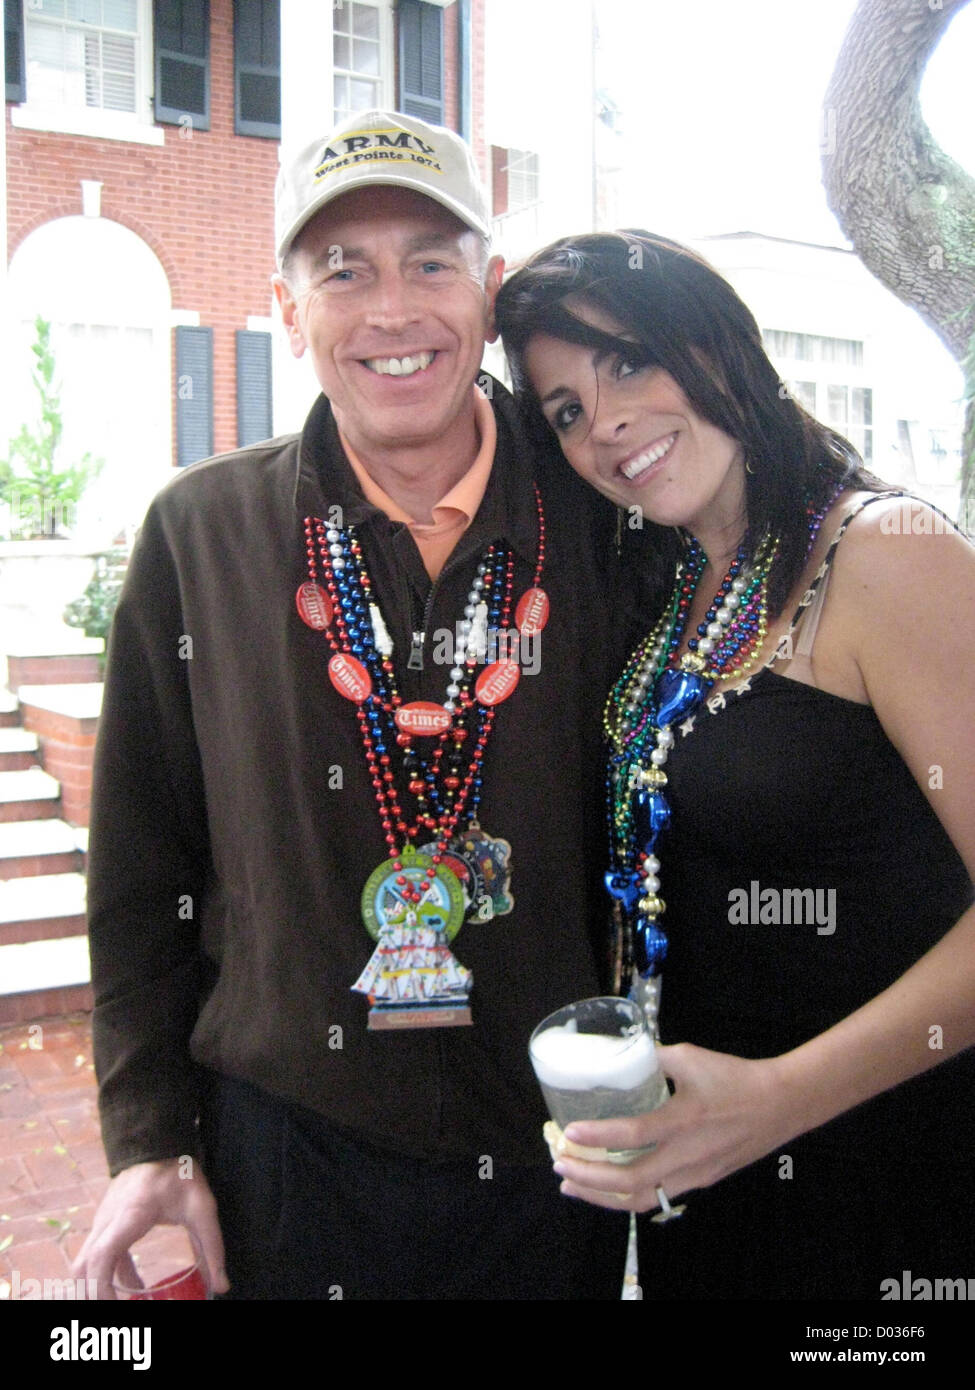 Nov 13, 2012 - JILL KELLEY is identified as the woman who is said to have received threatening emails from Gen. David Petraeus' paramour, Paula Broadwell. She serves as the State Department's liaison to the military's Joint Special Operations Command. PICTURED: Gen. DAVID PETRAEUS was a guest of socialite JILL KELLEY to watch Tampa's annual pirate invasion, Gasparilla, from her Bayshore Boulevard residence on January 30, 2010. Kelley and her husband Scott struck up a friendship with Petraeus and his wife, Holly, when they were stationed at MacDill AFB, and considered the couple to be like fami Stock Photo